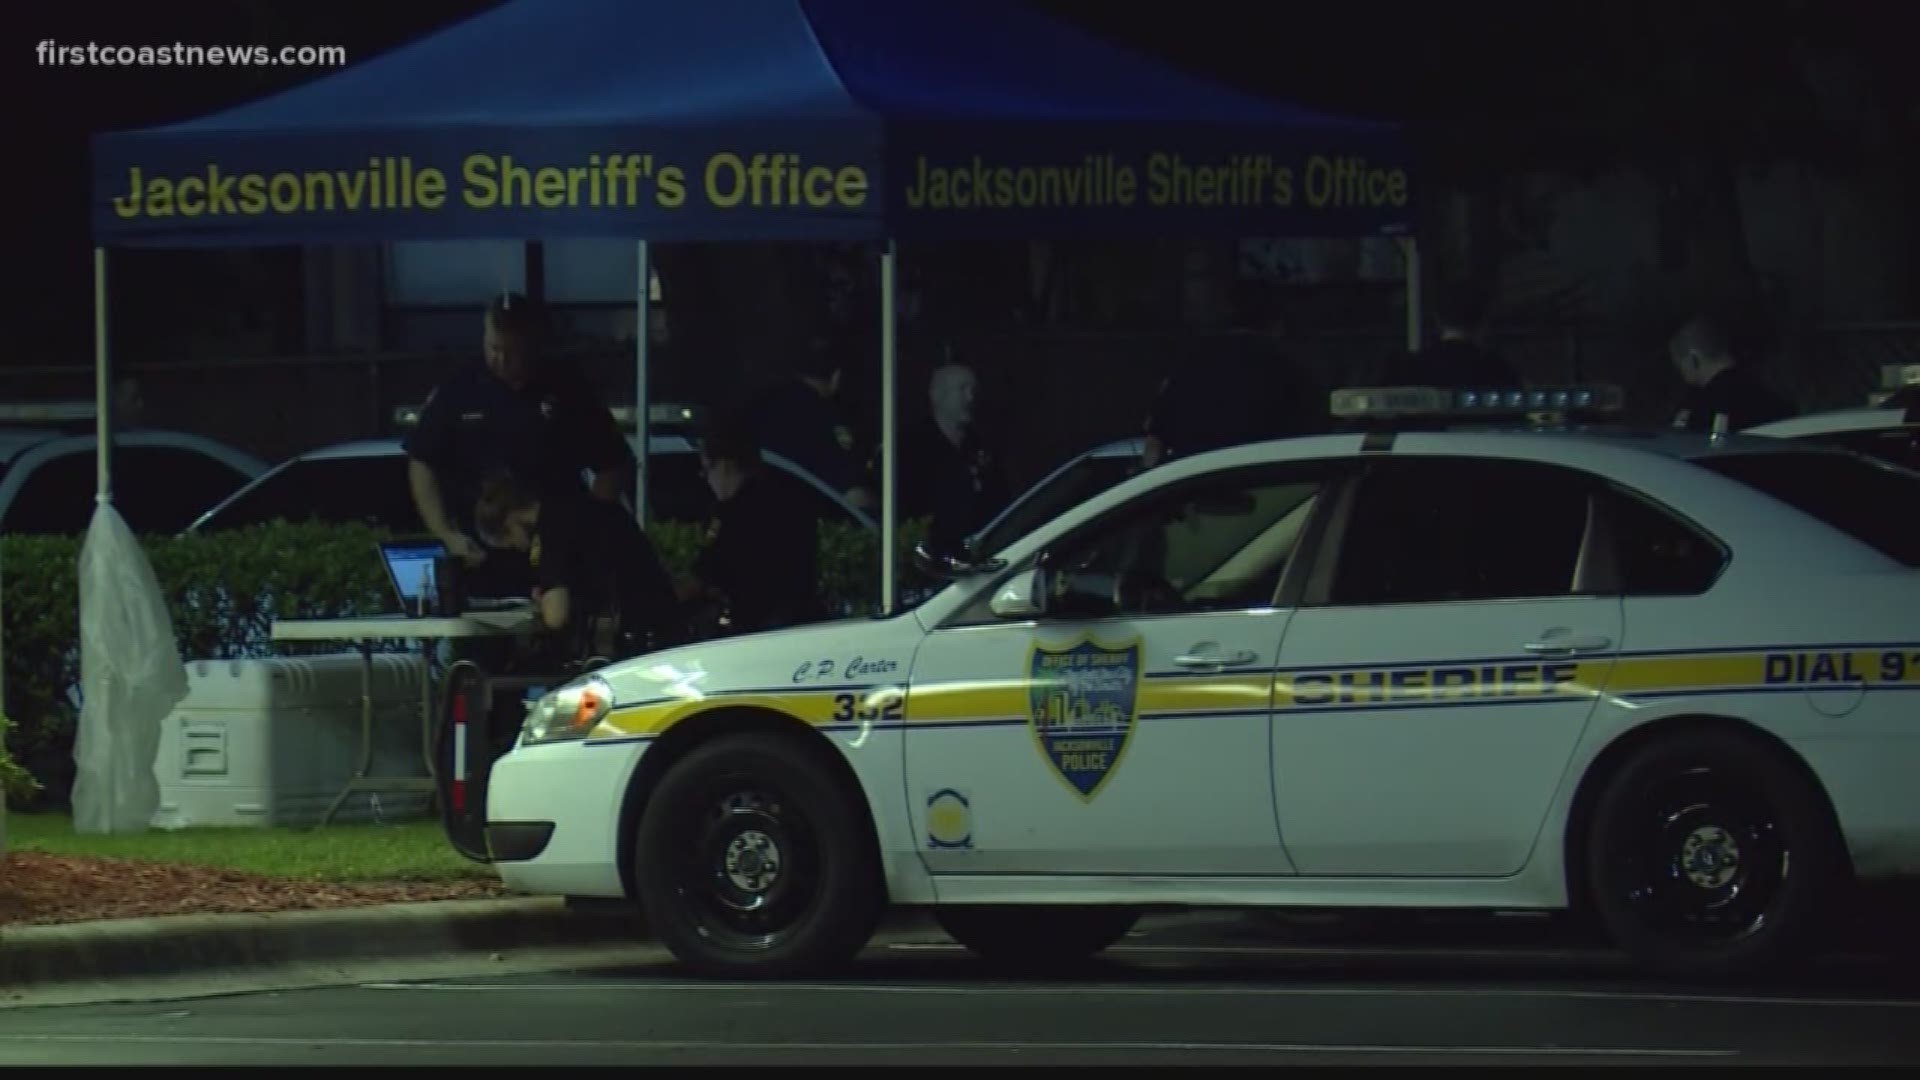 Monday night, JSO conducted a criminal investigation in the 103rd Street area, which is less than a mile from where 7-year-old Heidy Rivas-Villanueva was shot and killed by a stray bullet during a shootout.